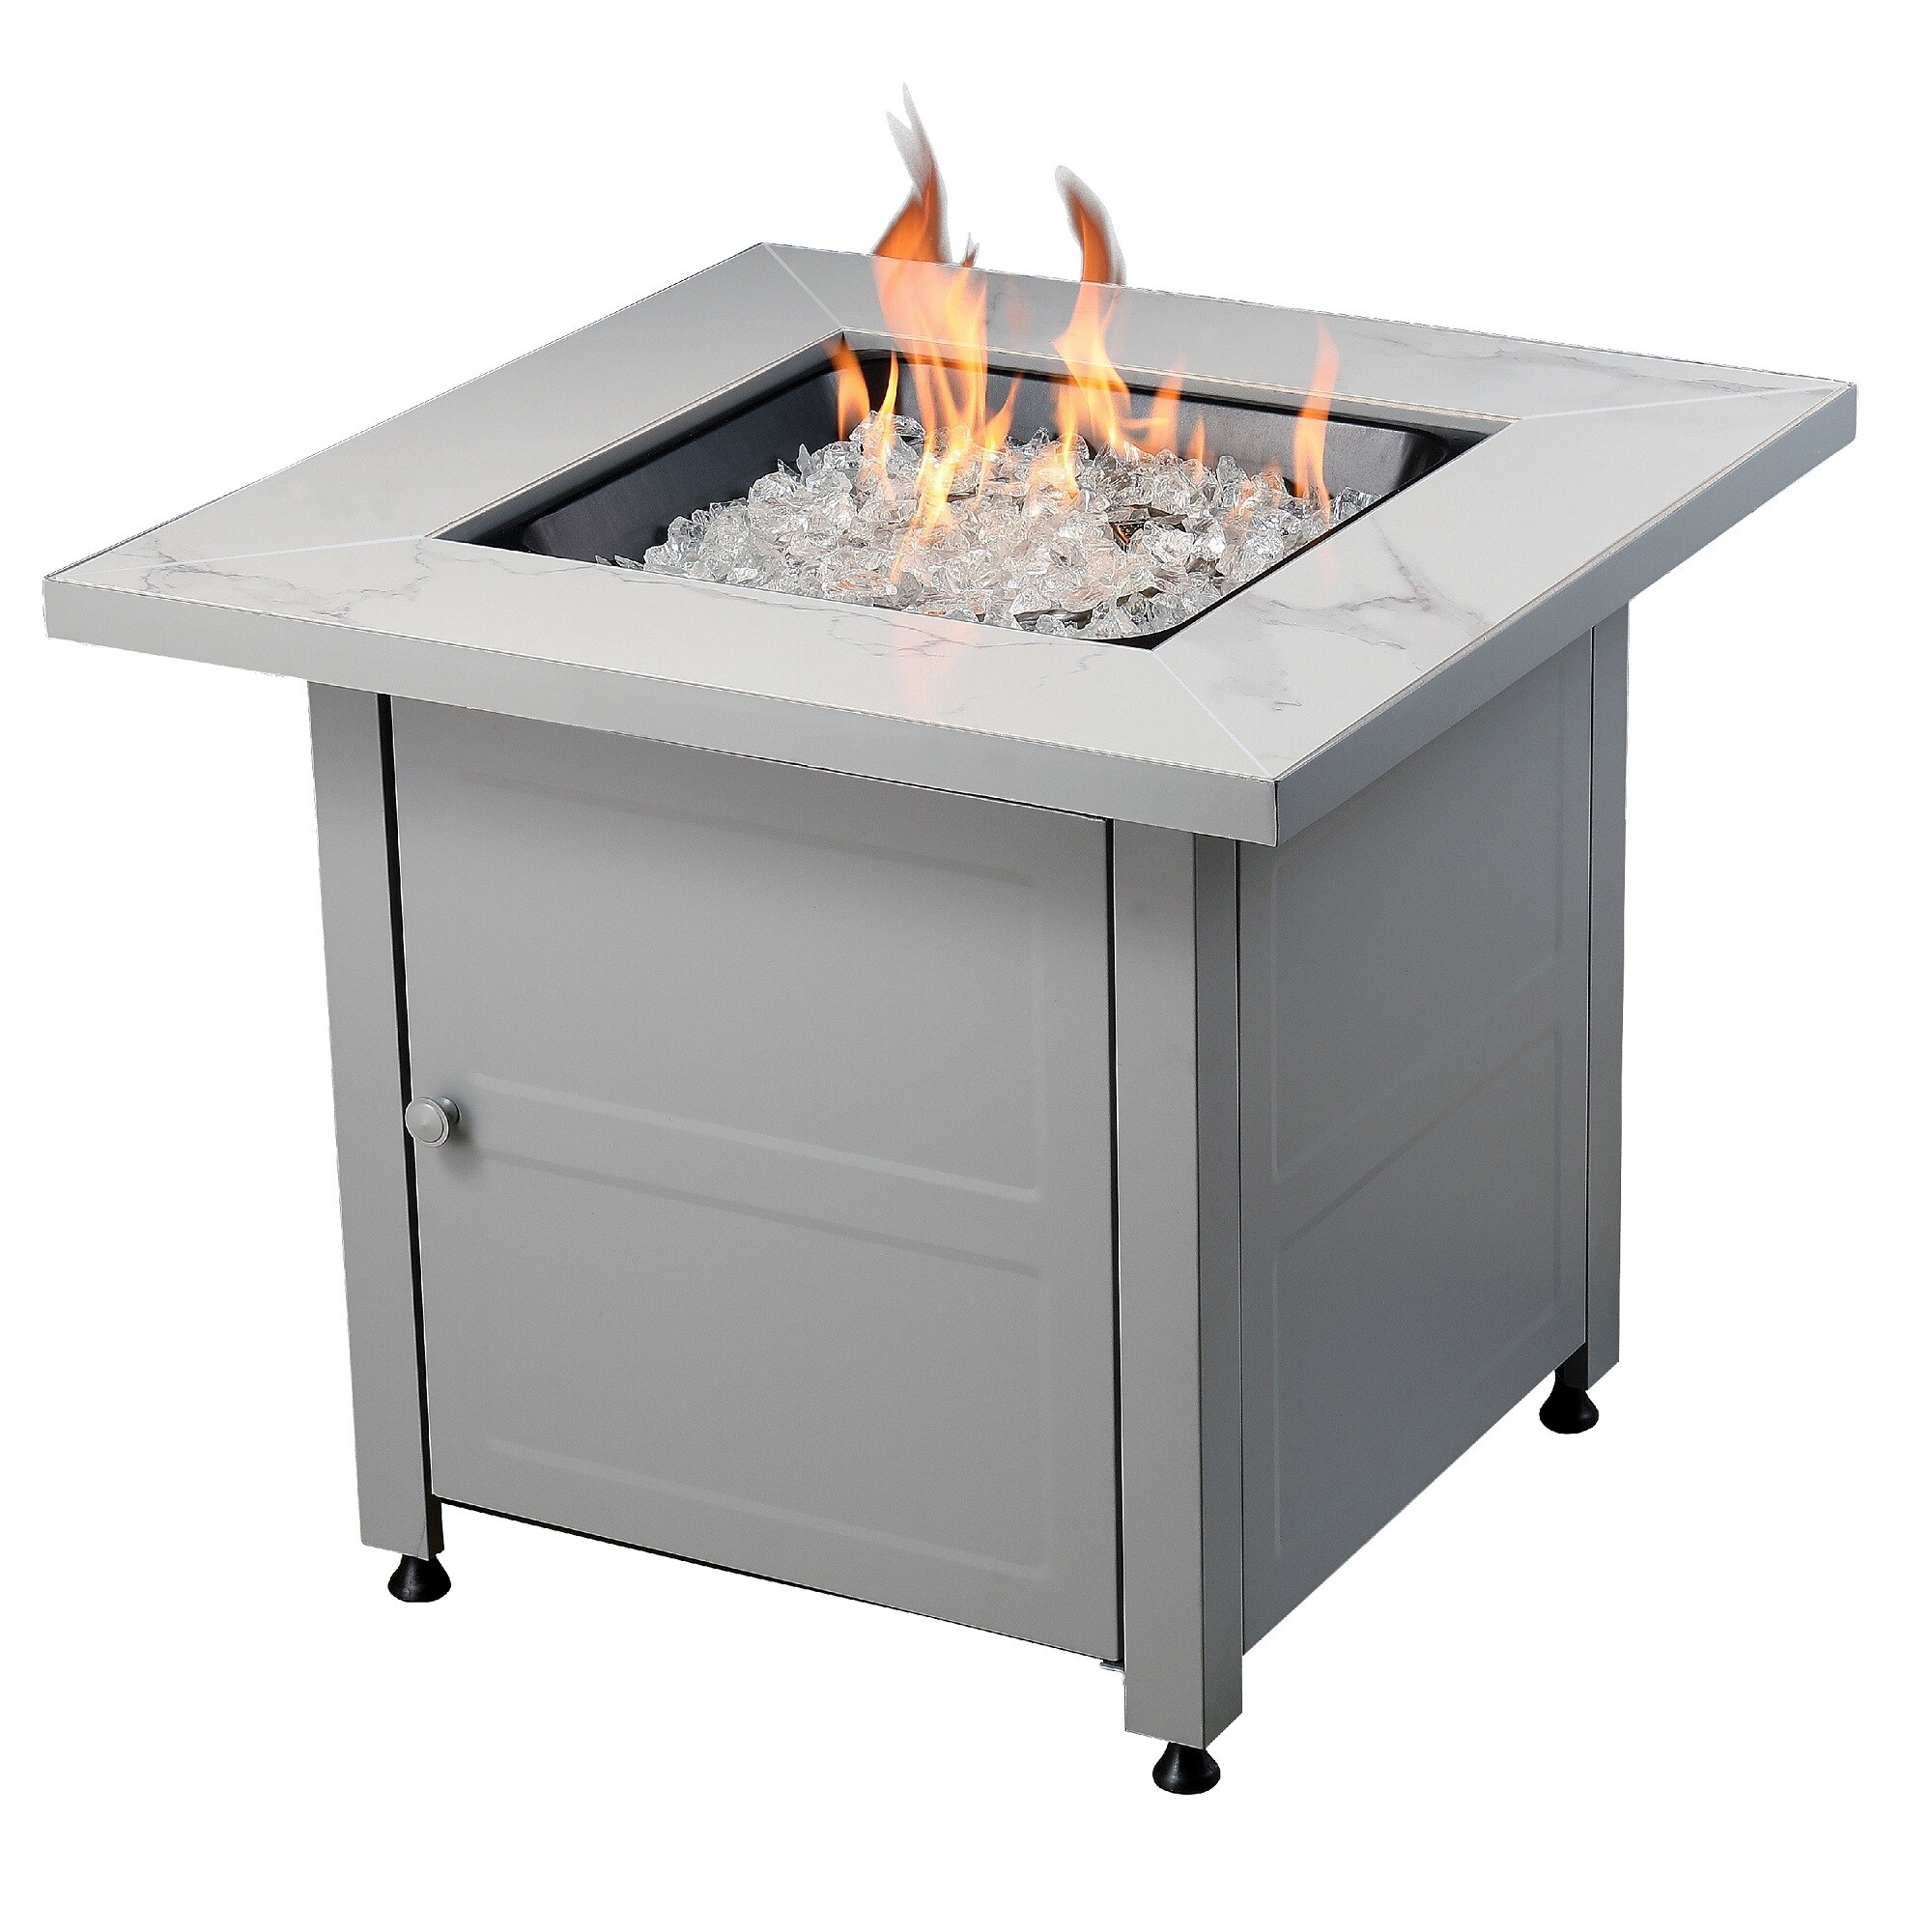 Propane Gas Fire Pit Table, Hayneedle Propane Fire Pits